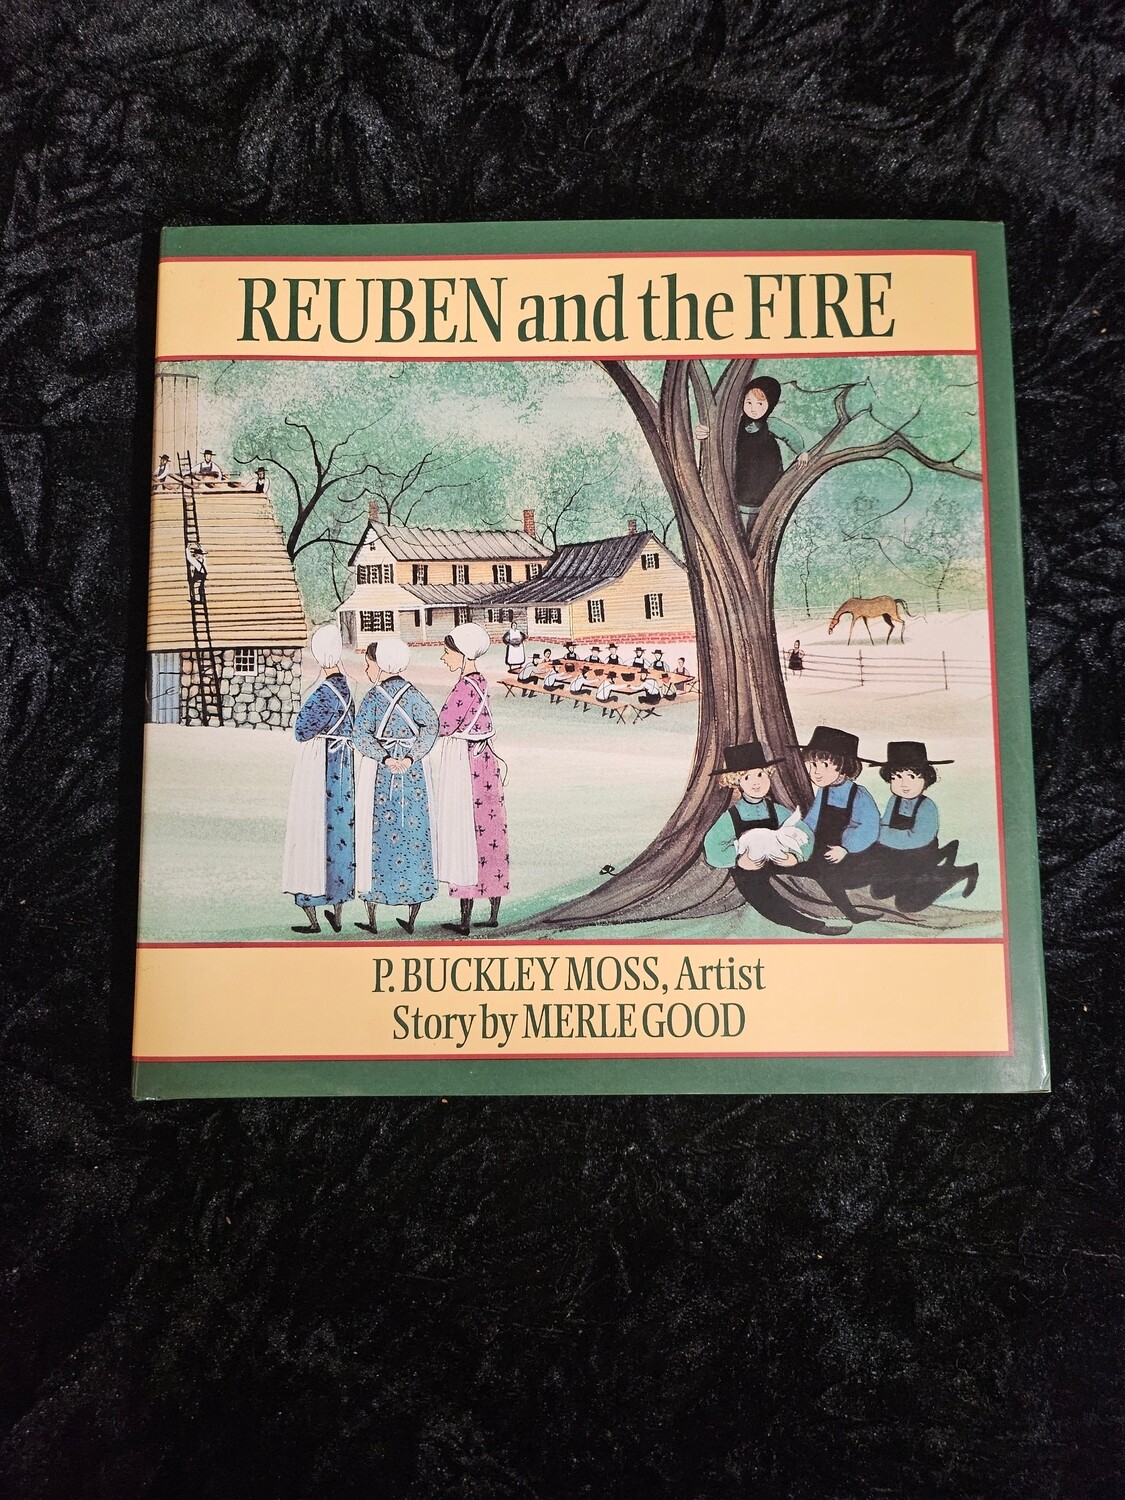 Ruben and the Fire book